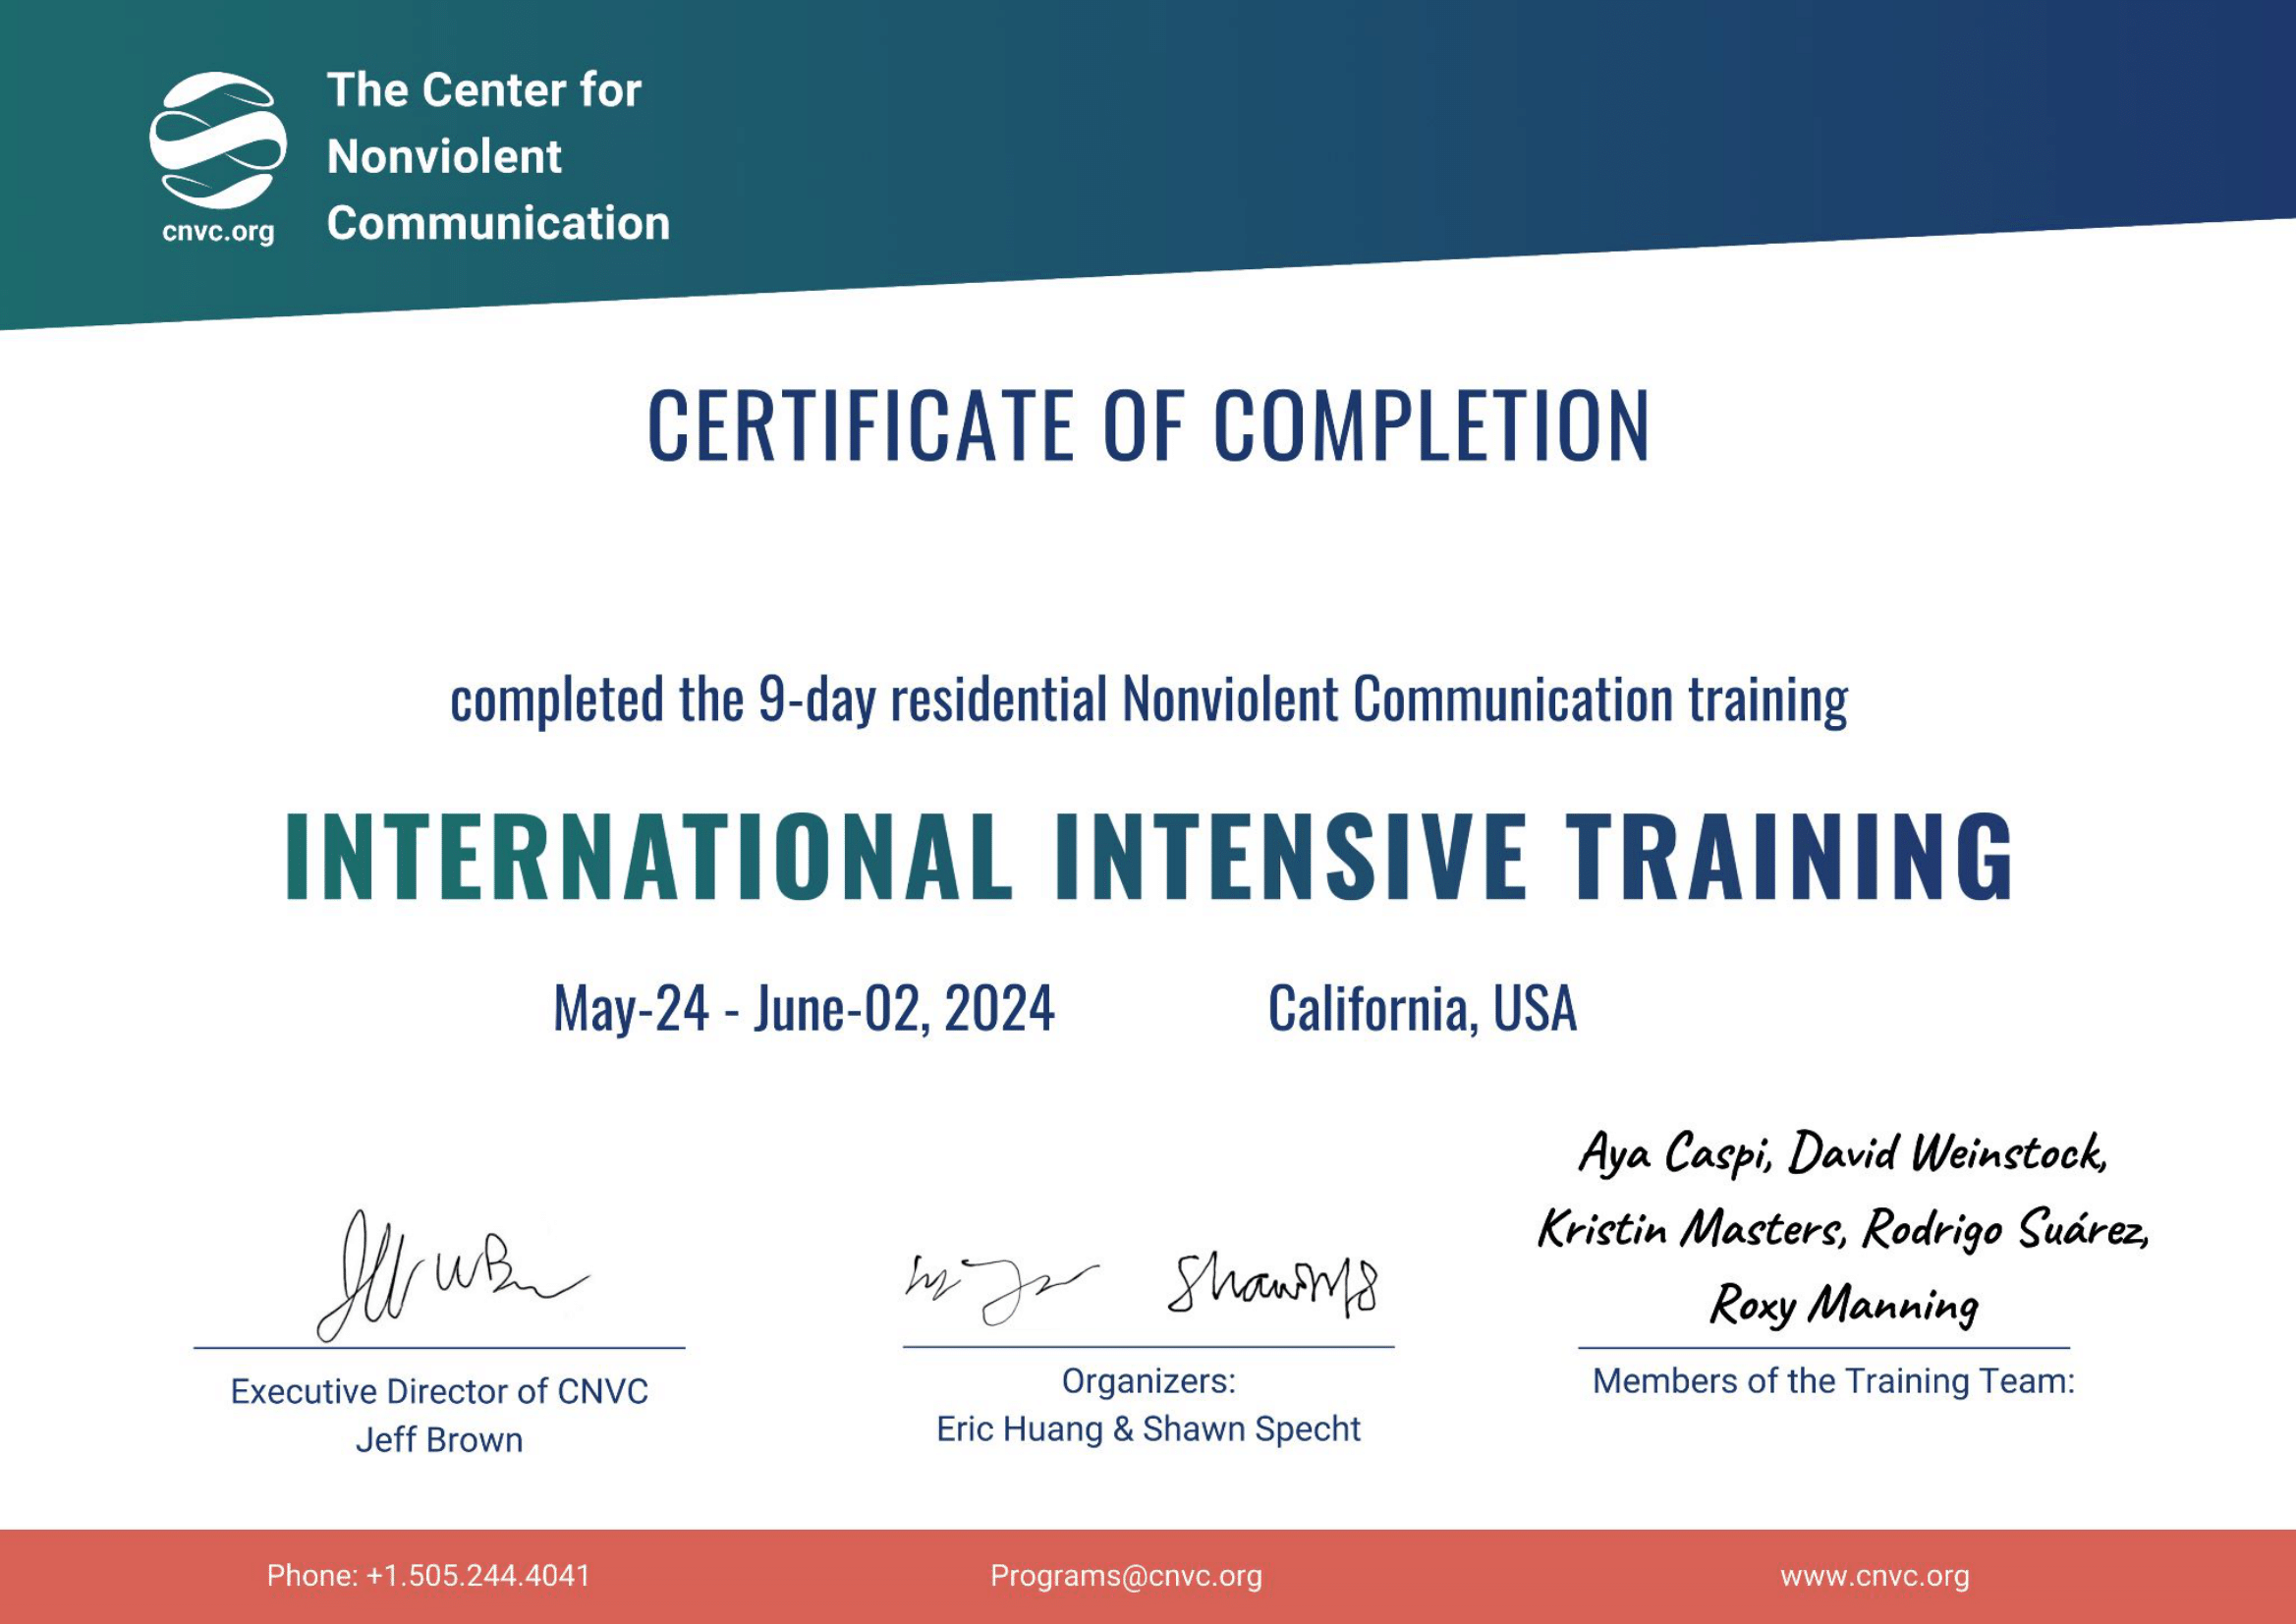 Certificate of Completion - IIT USA-CA 2024